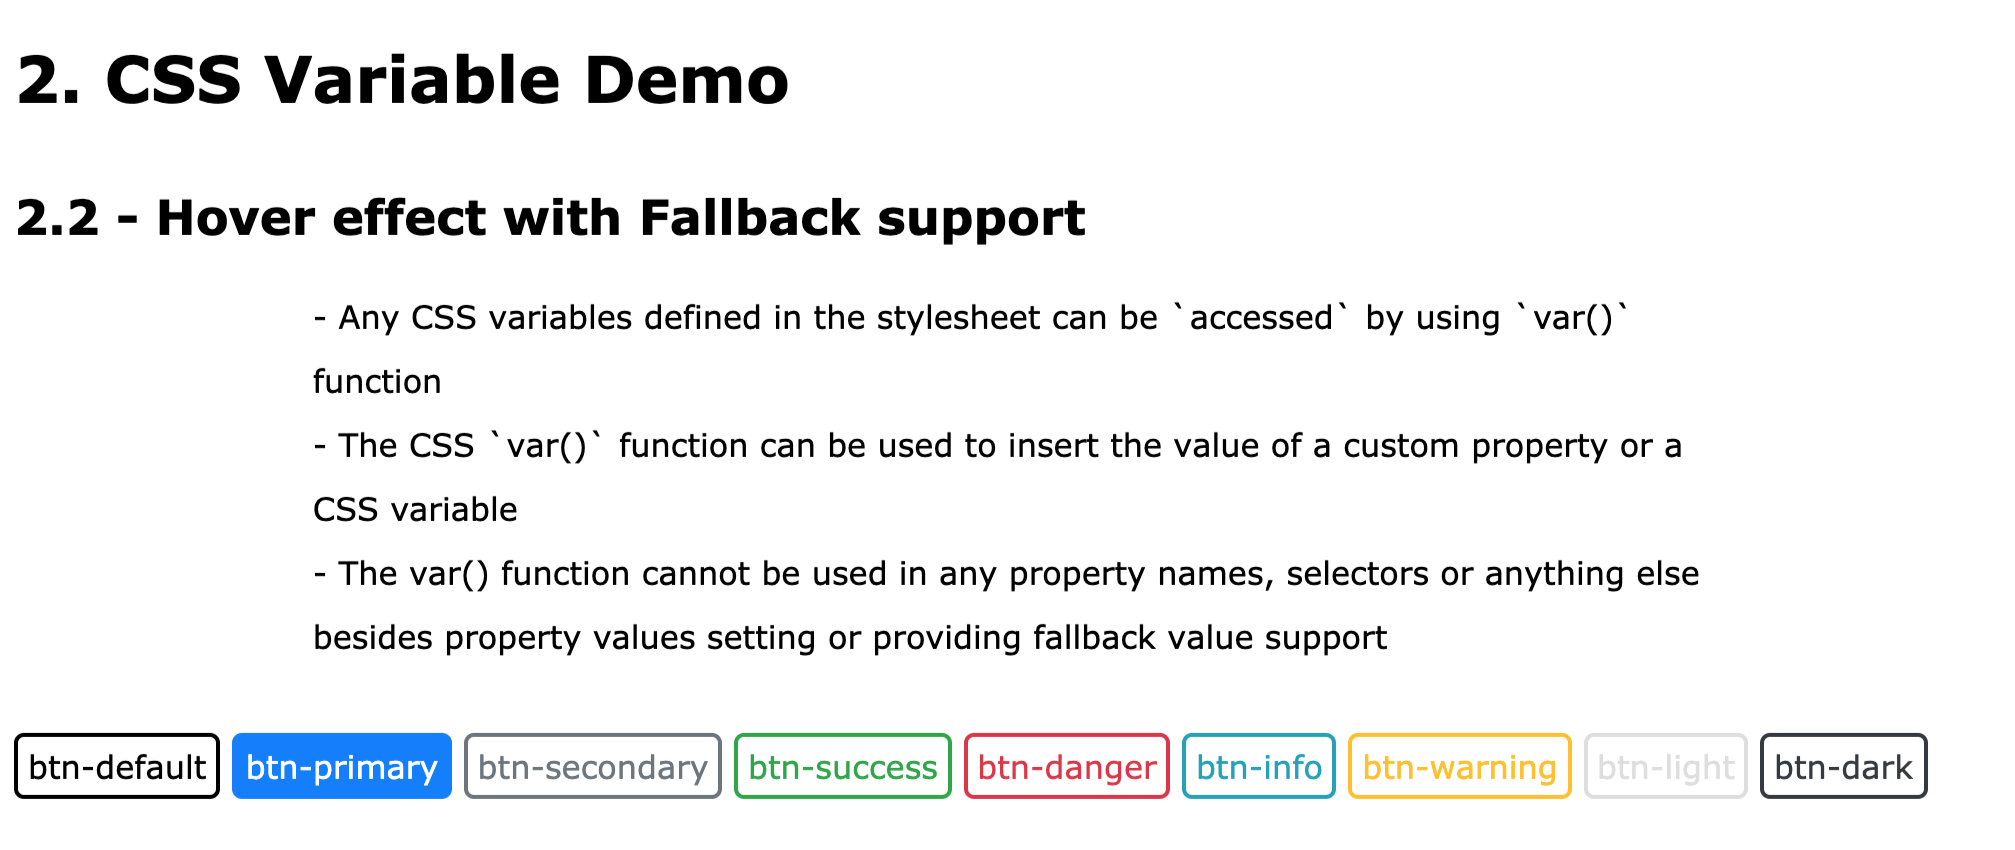 CSS Variables Demo - Hover effect with fallback support